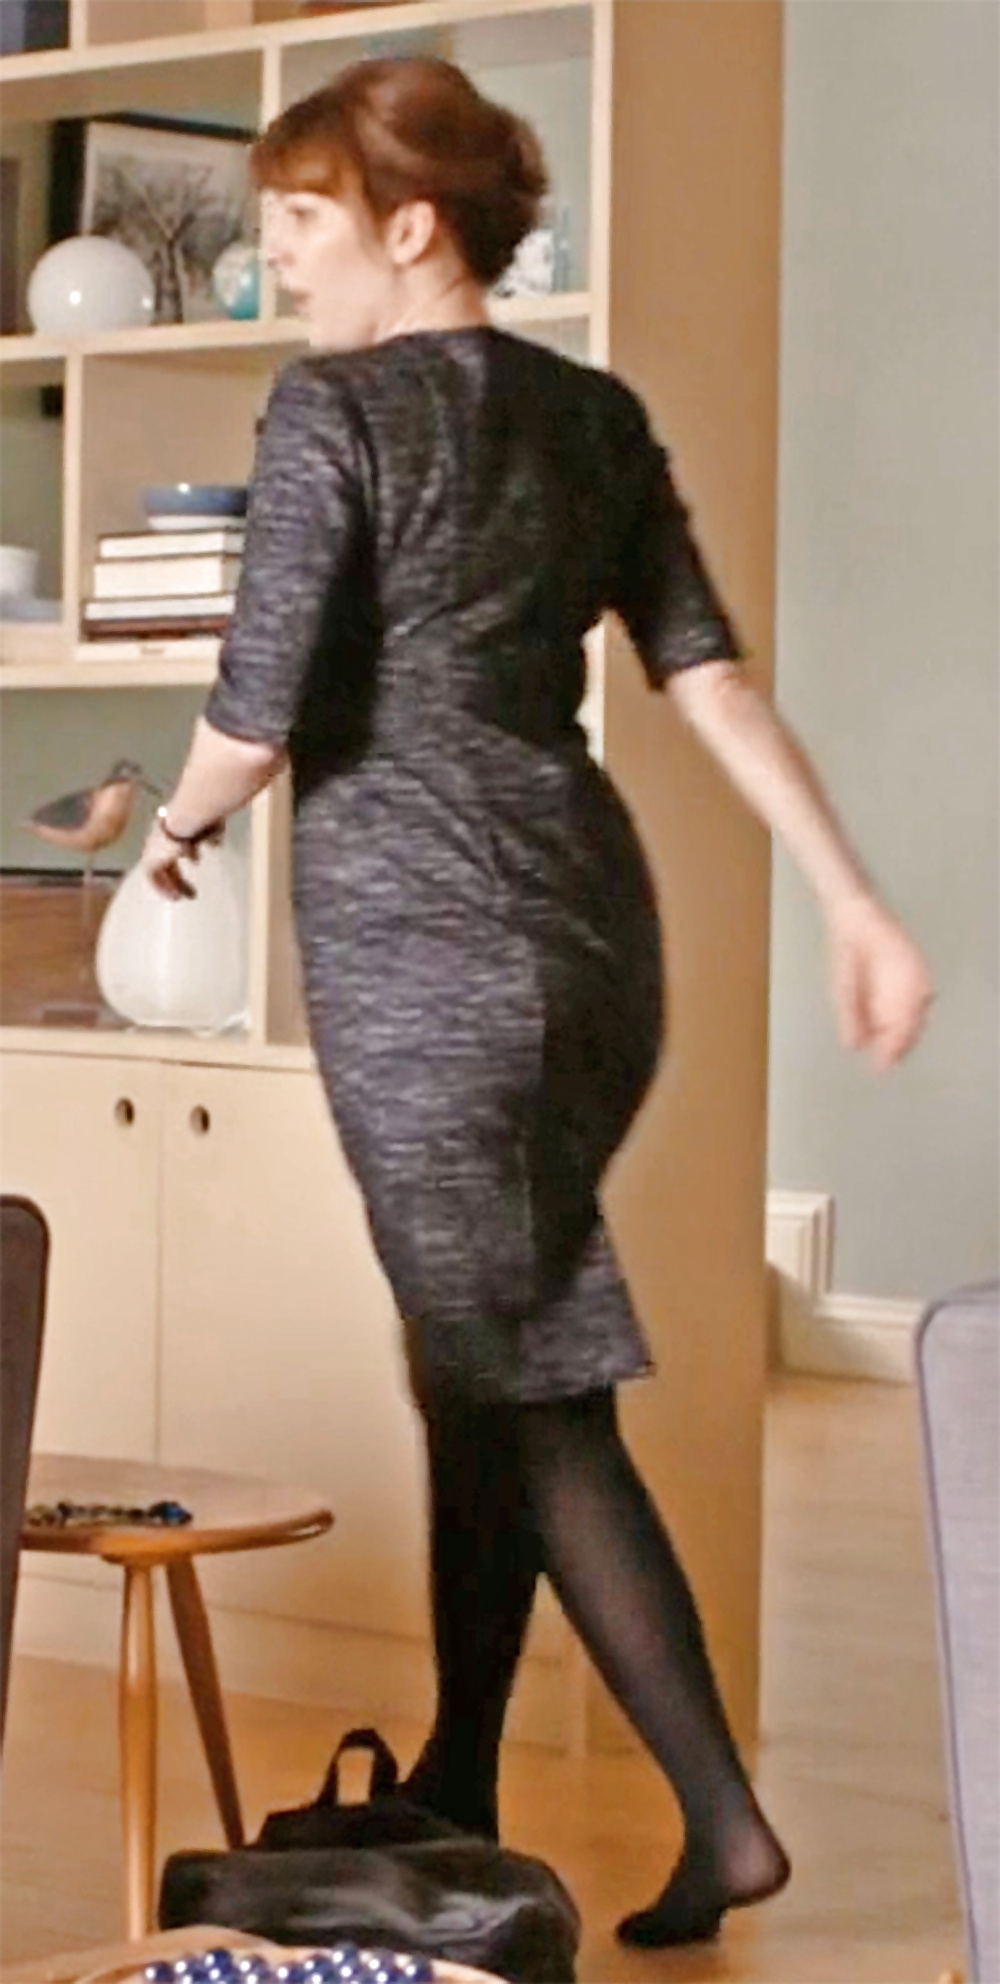 Sex Katherine Parkinson (IT Crowd, Humans) In TIghts Pantyhose image